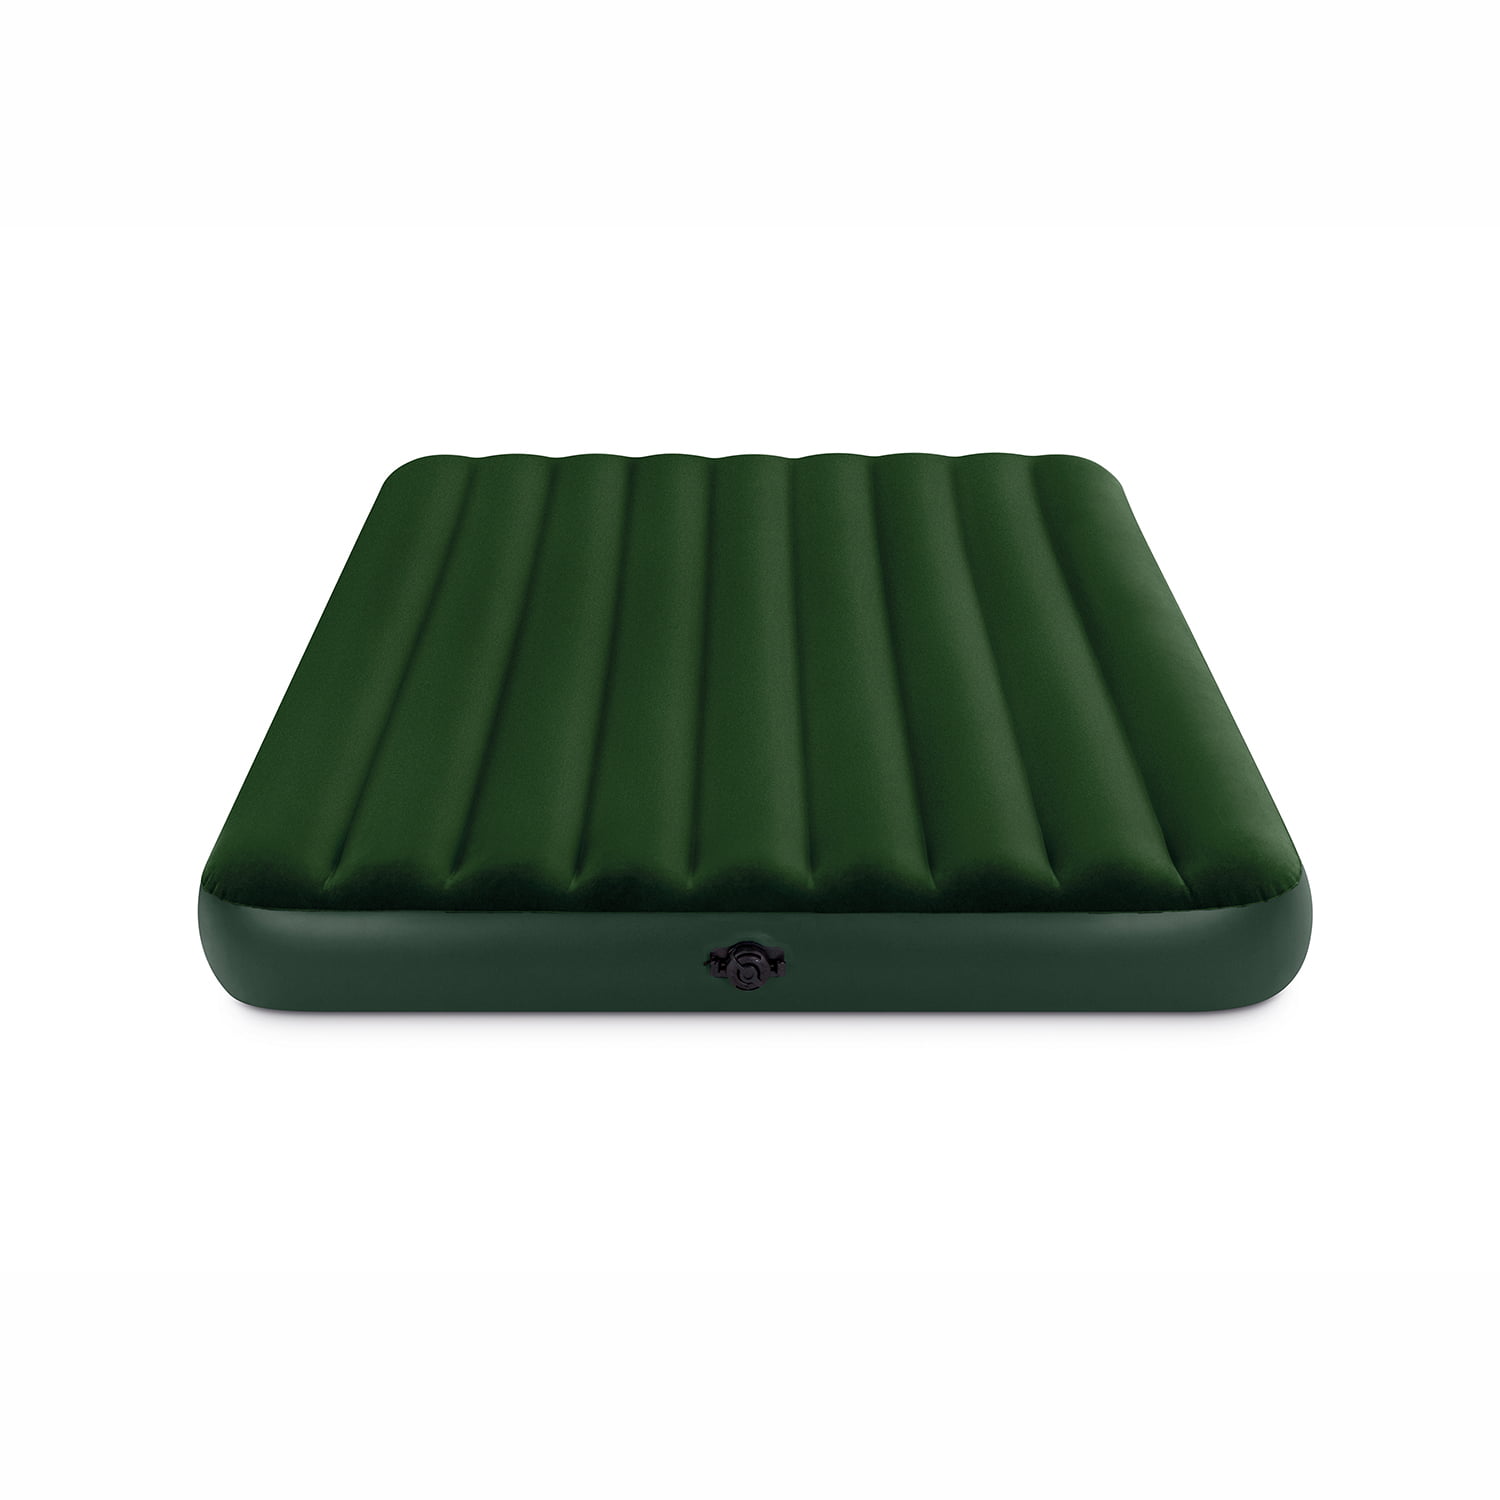 NEW Intex Classic Downy Queen Airbed FREE SHIPPING inflatable air mattress bed 